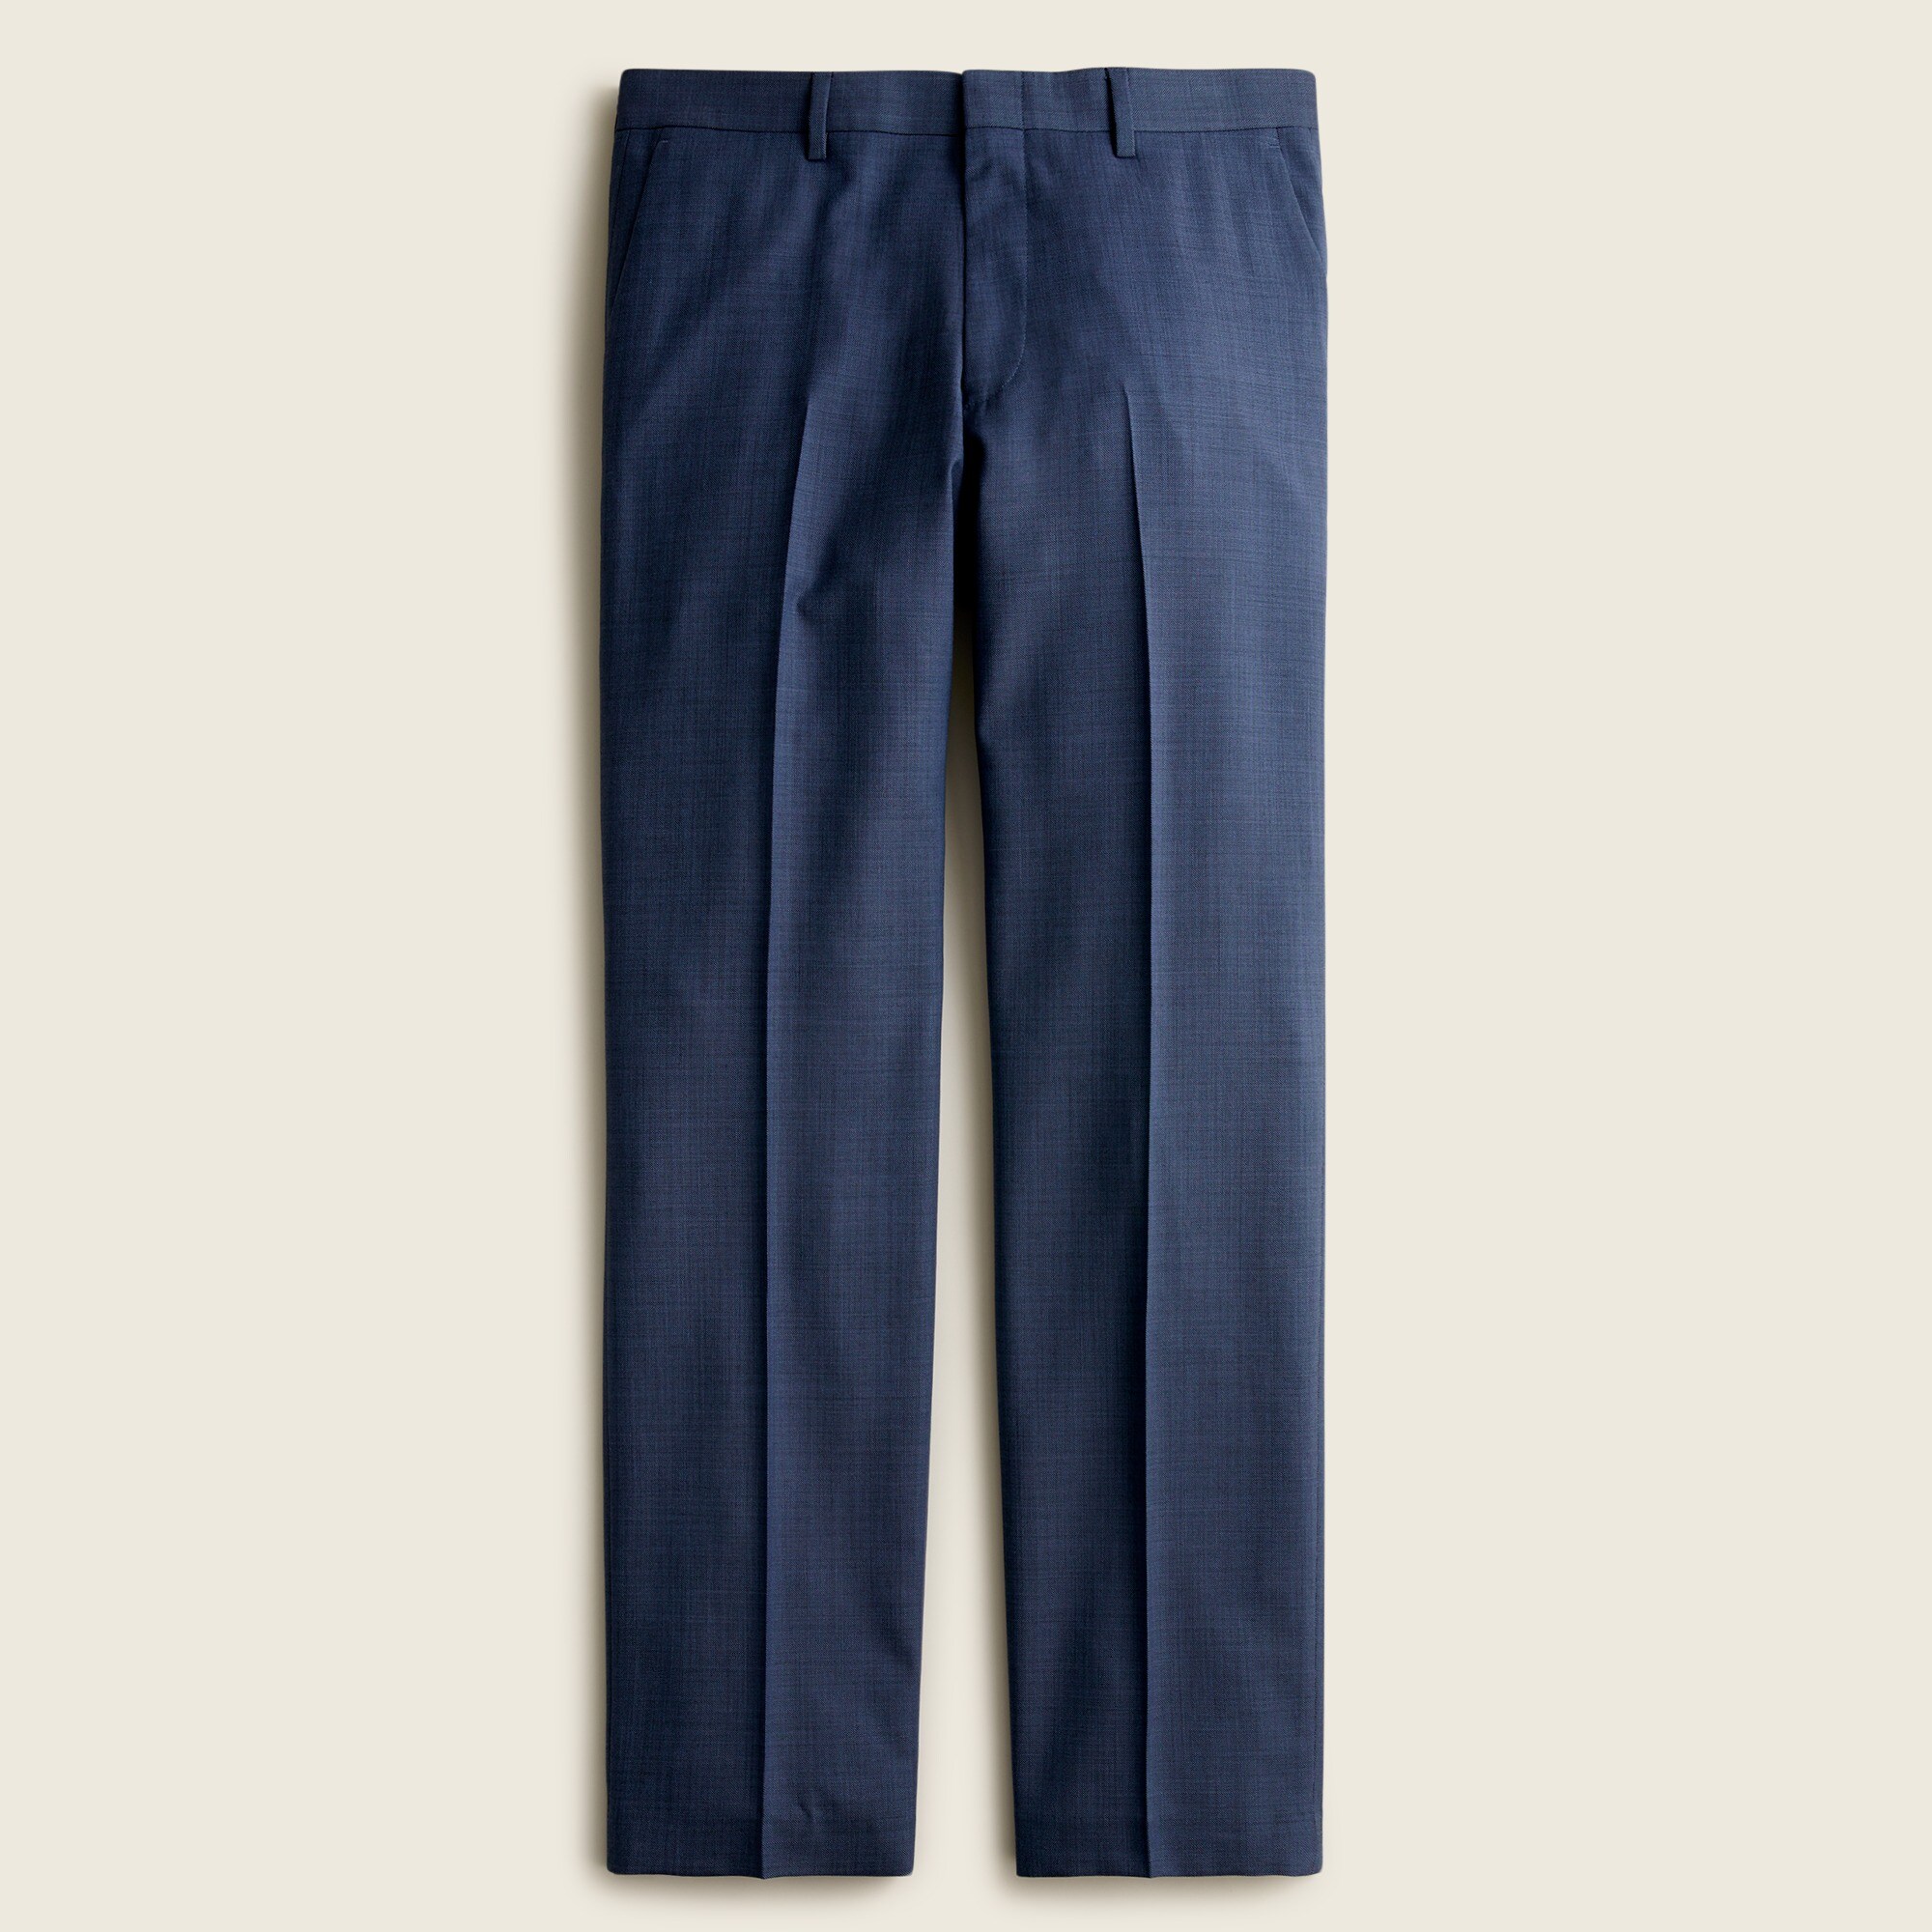  Ludlow Classic-fit suit pant in Italian stretch four-season wool blend